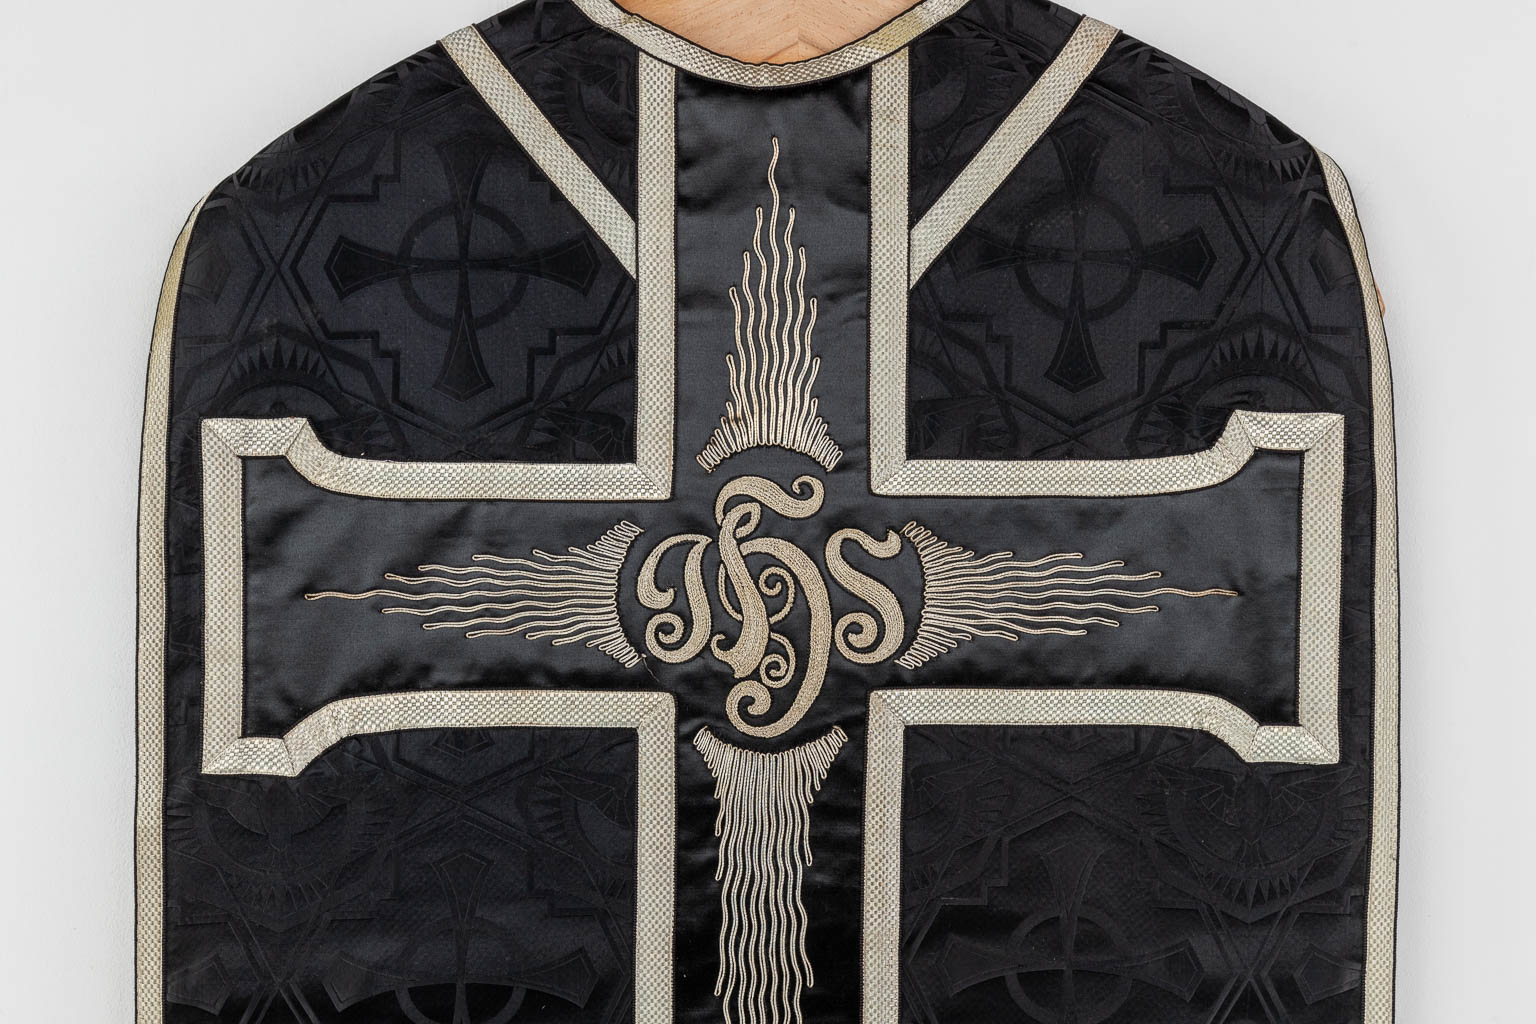 A set of Black Lithurgical Robes, Roman Chasubles, Stola, Manisple and Chalice Veils. 